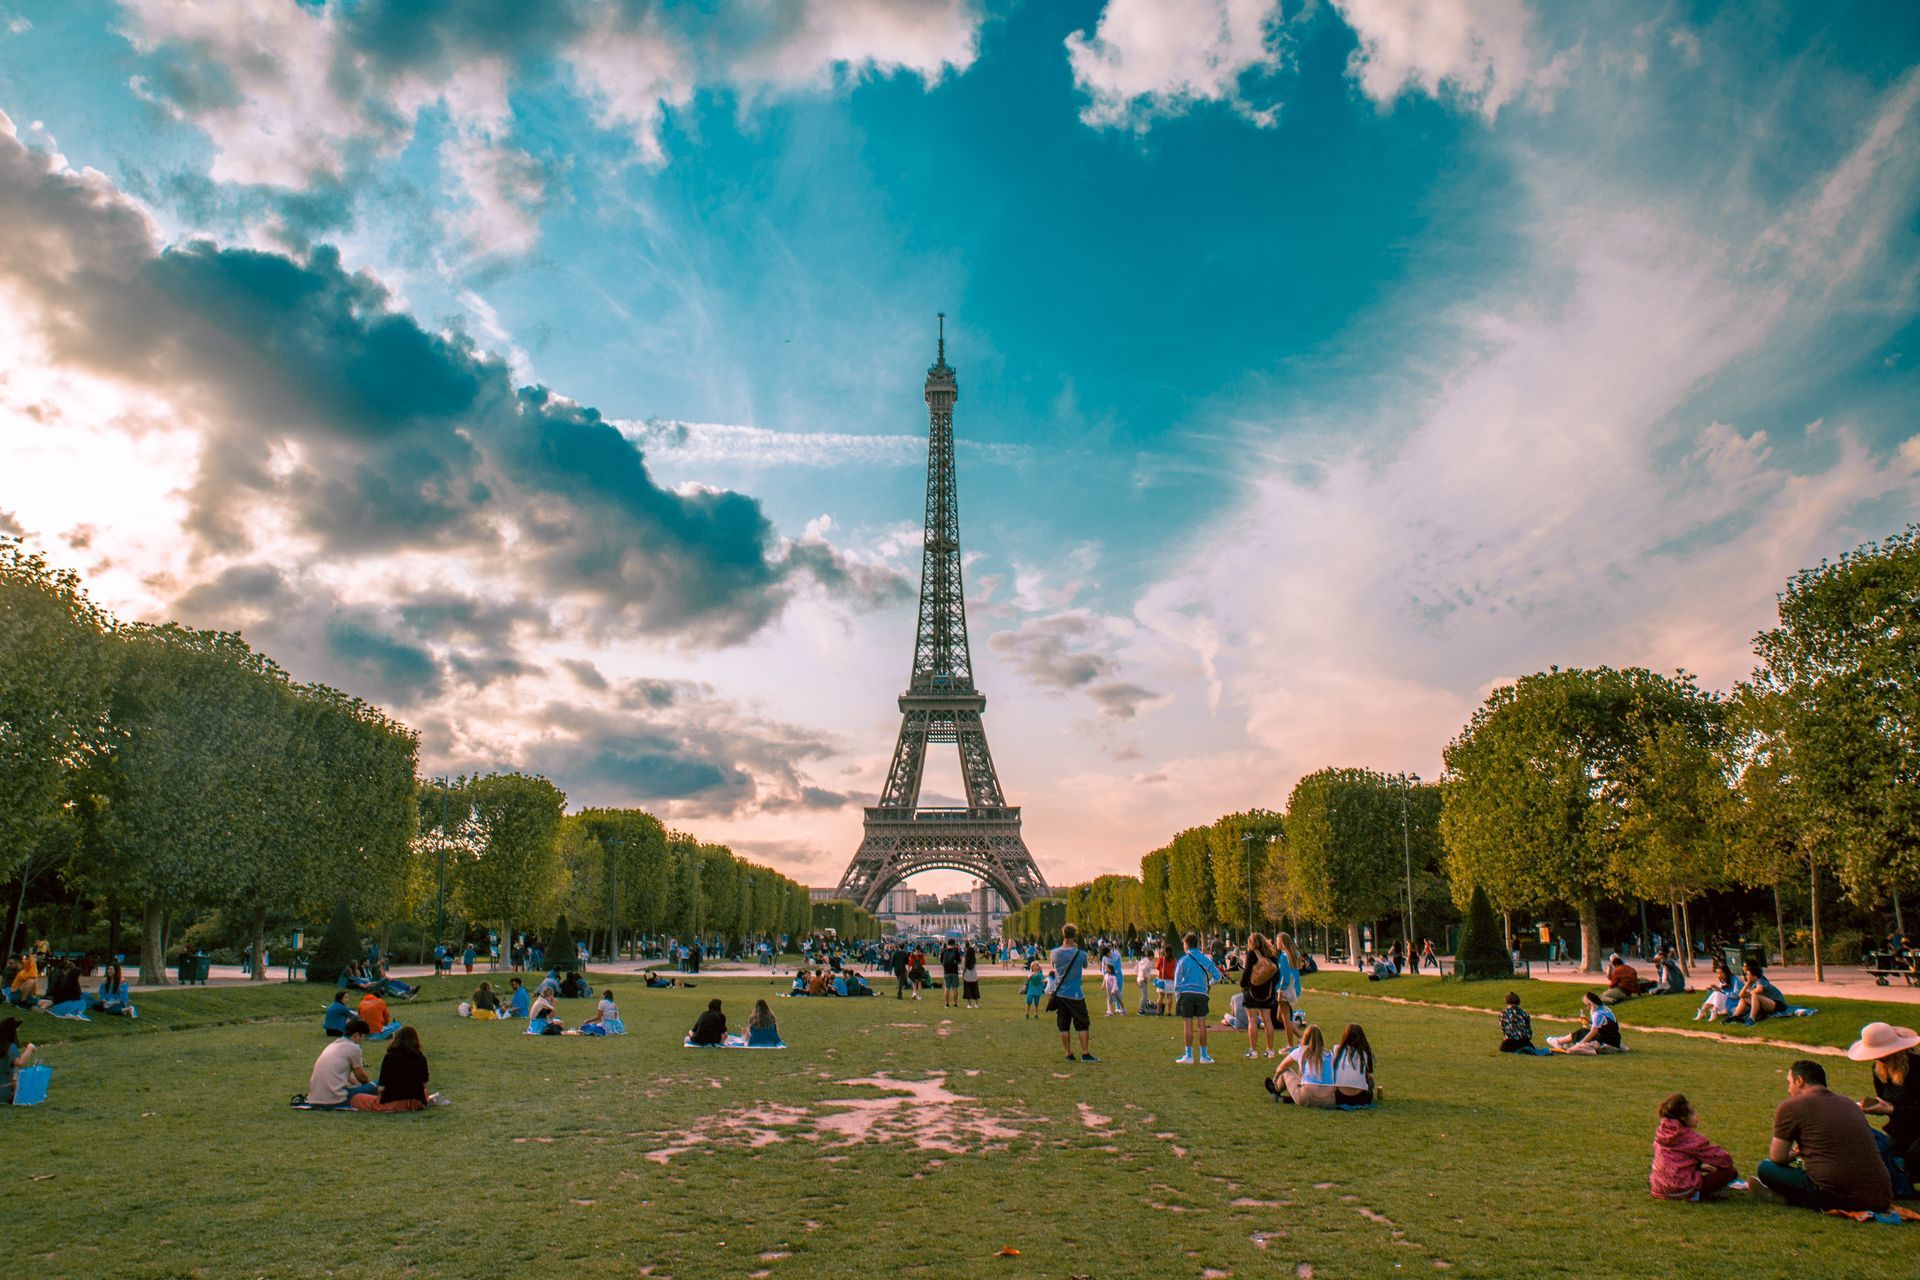 A group of people are sitting in a park in front of the eiffel tower.